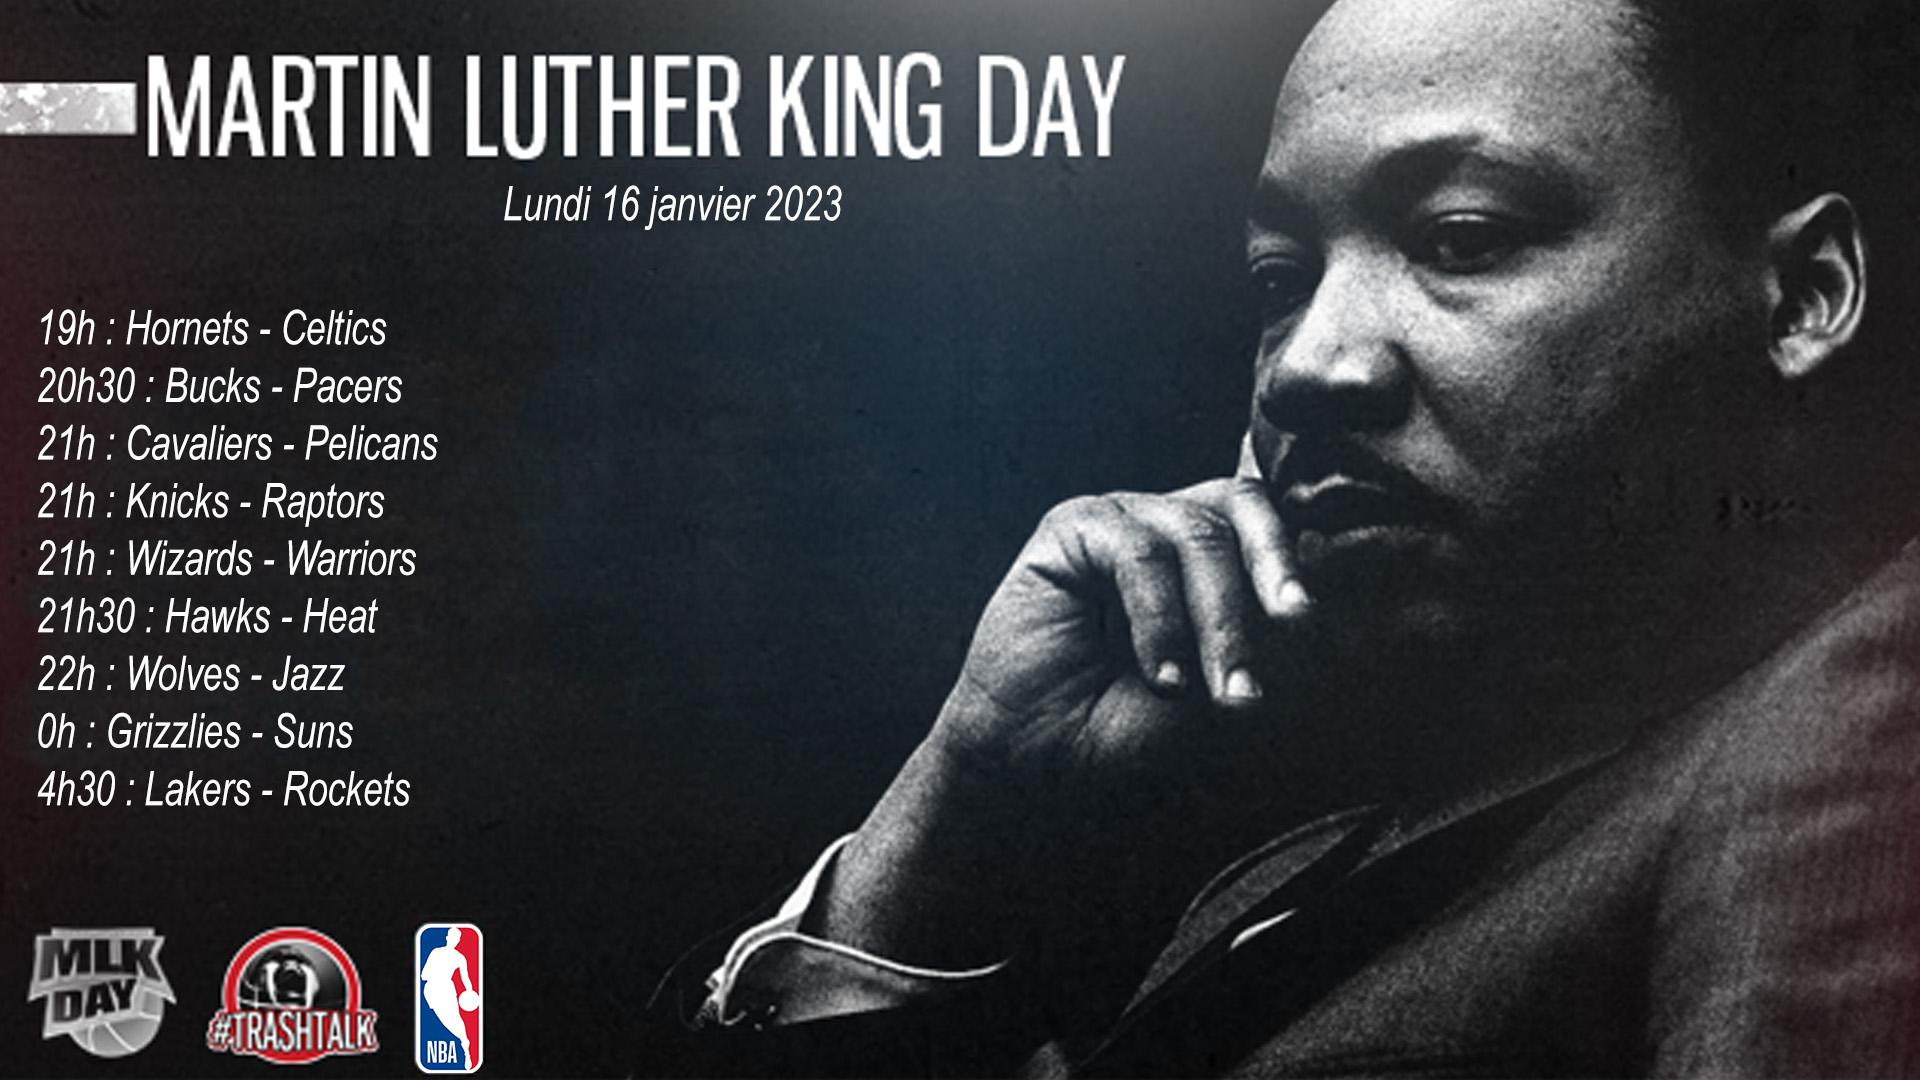 Couverture Article MLK Day 2023